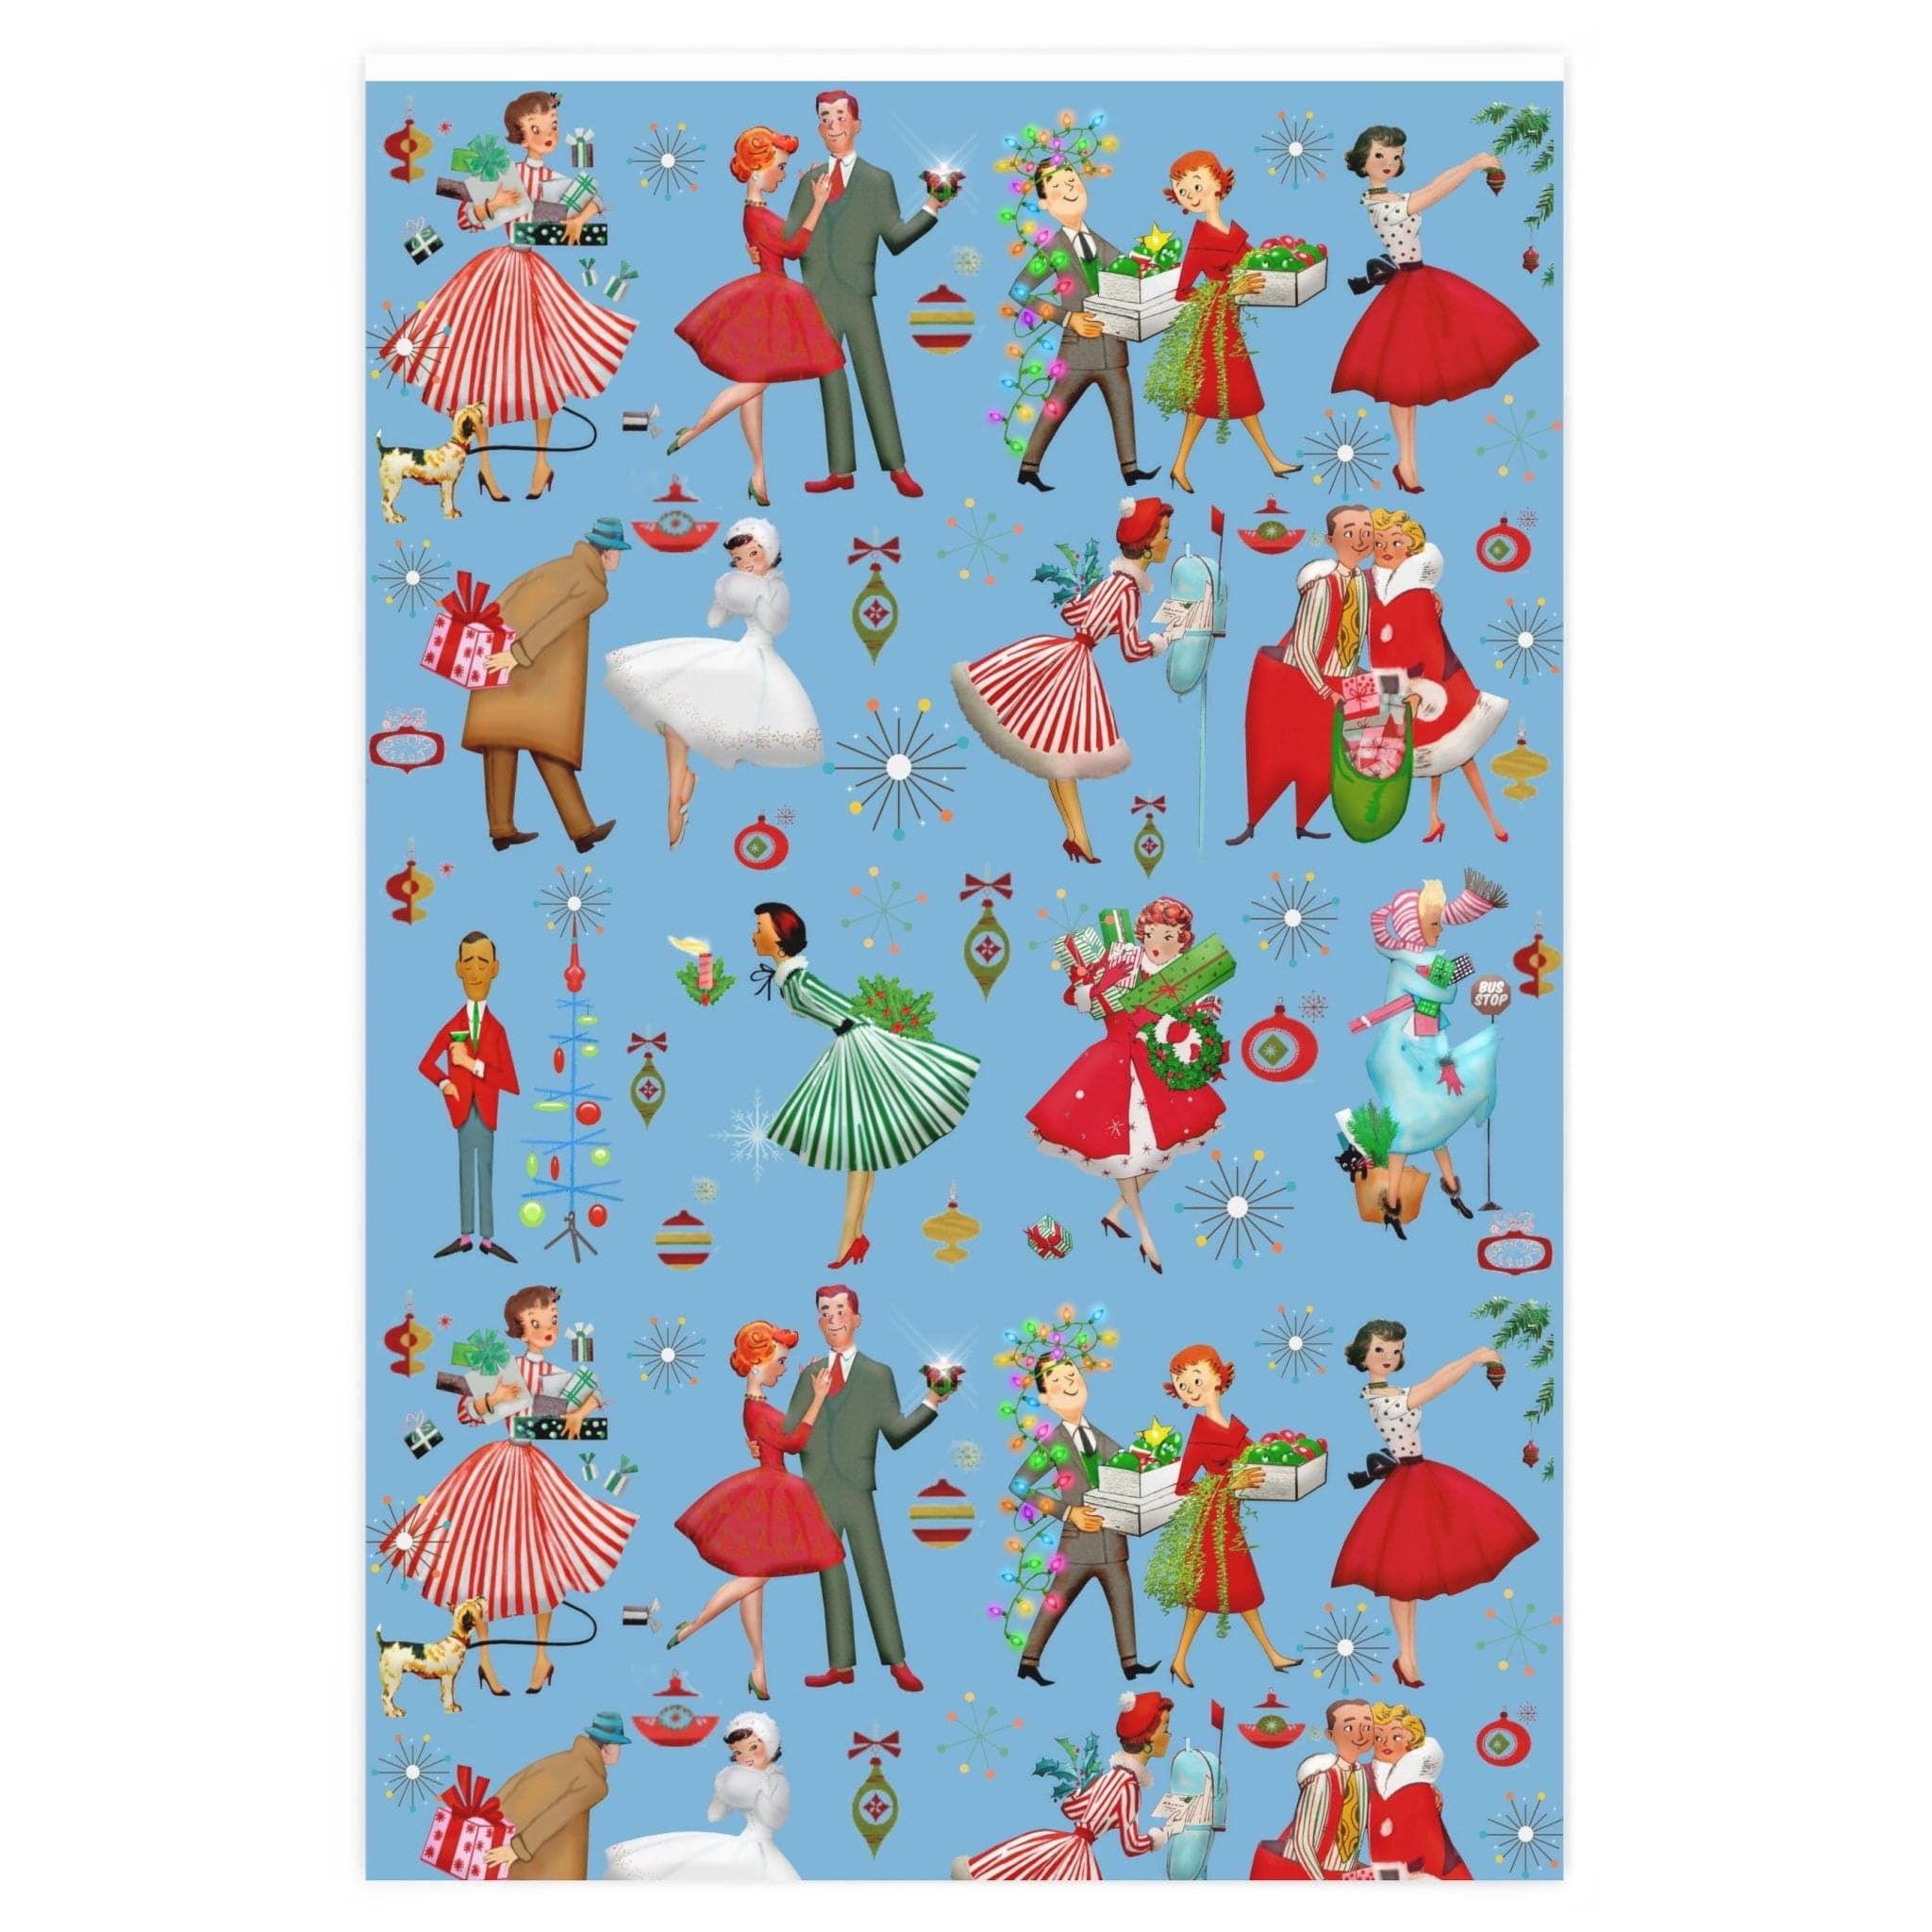 Fabulous Vintage Wrapping Paper - by the Yard – K.MARIE